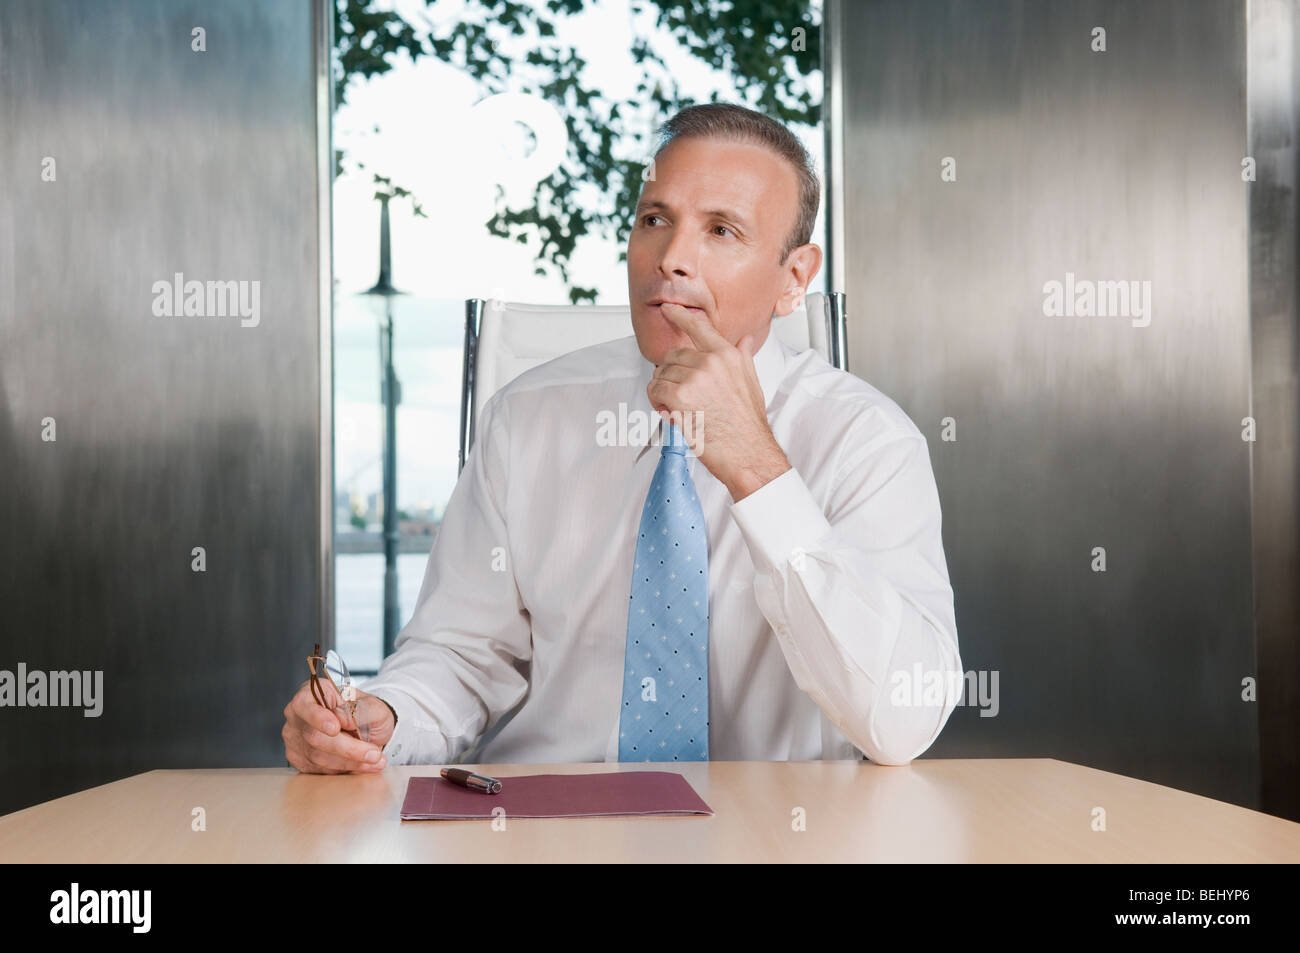 Businessman thinking in a board room Stock Photo